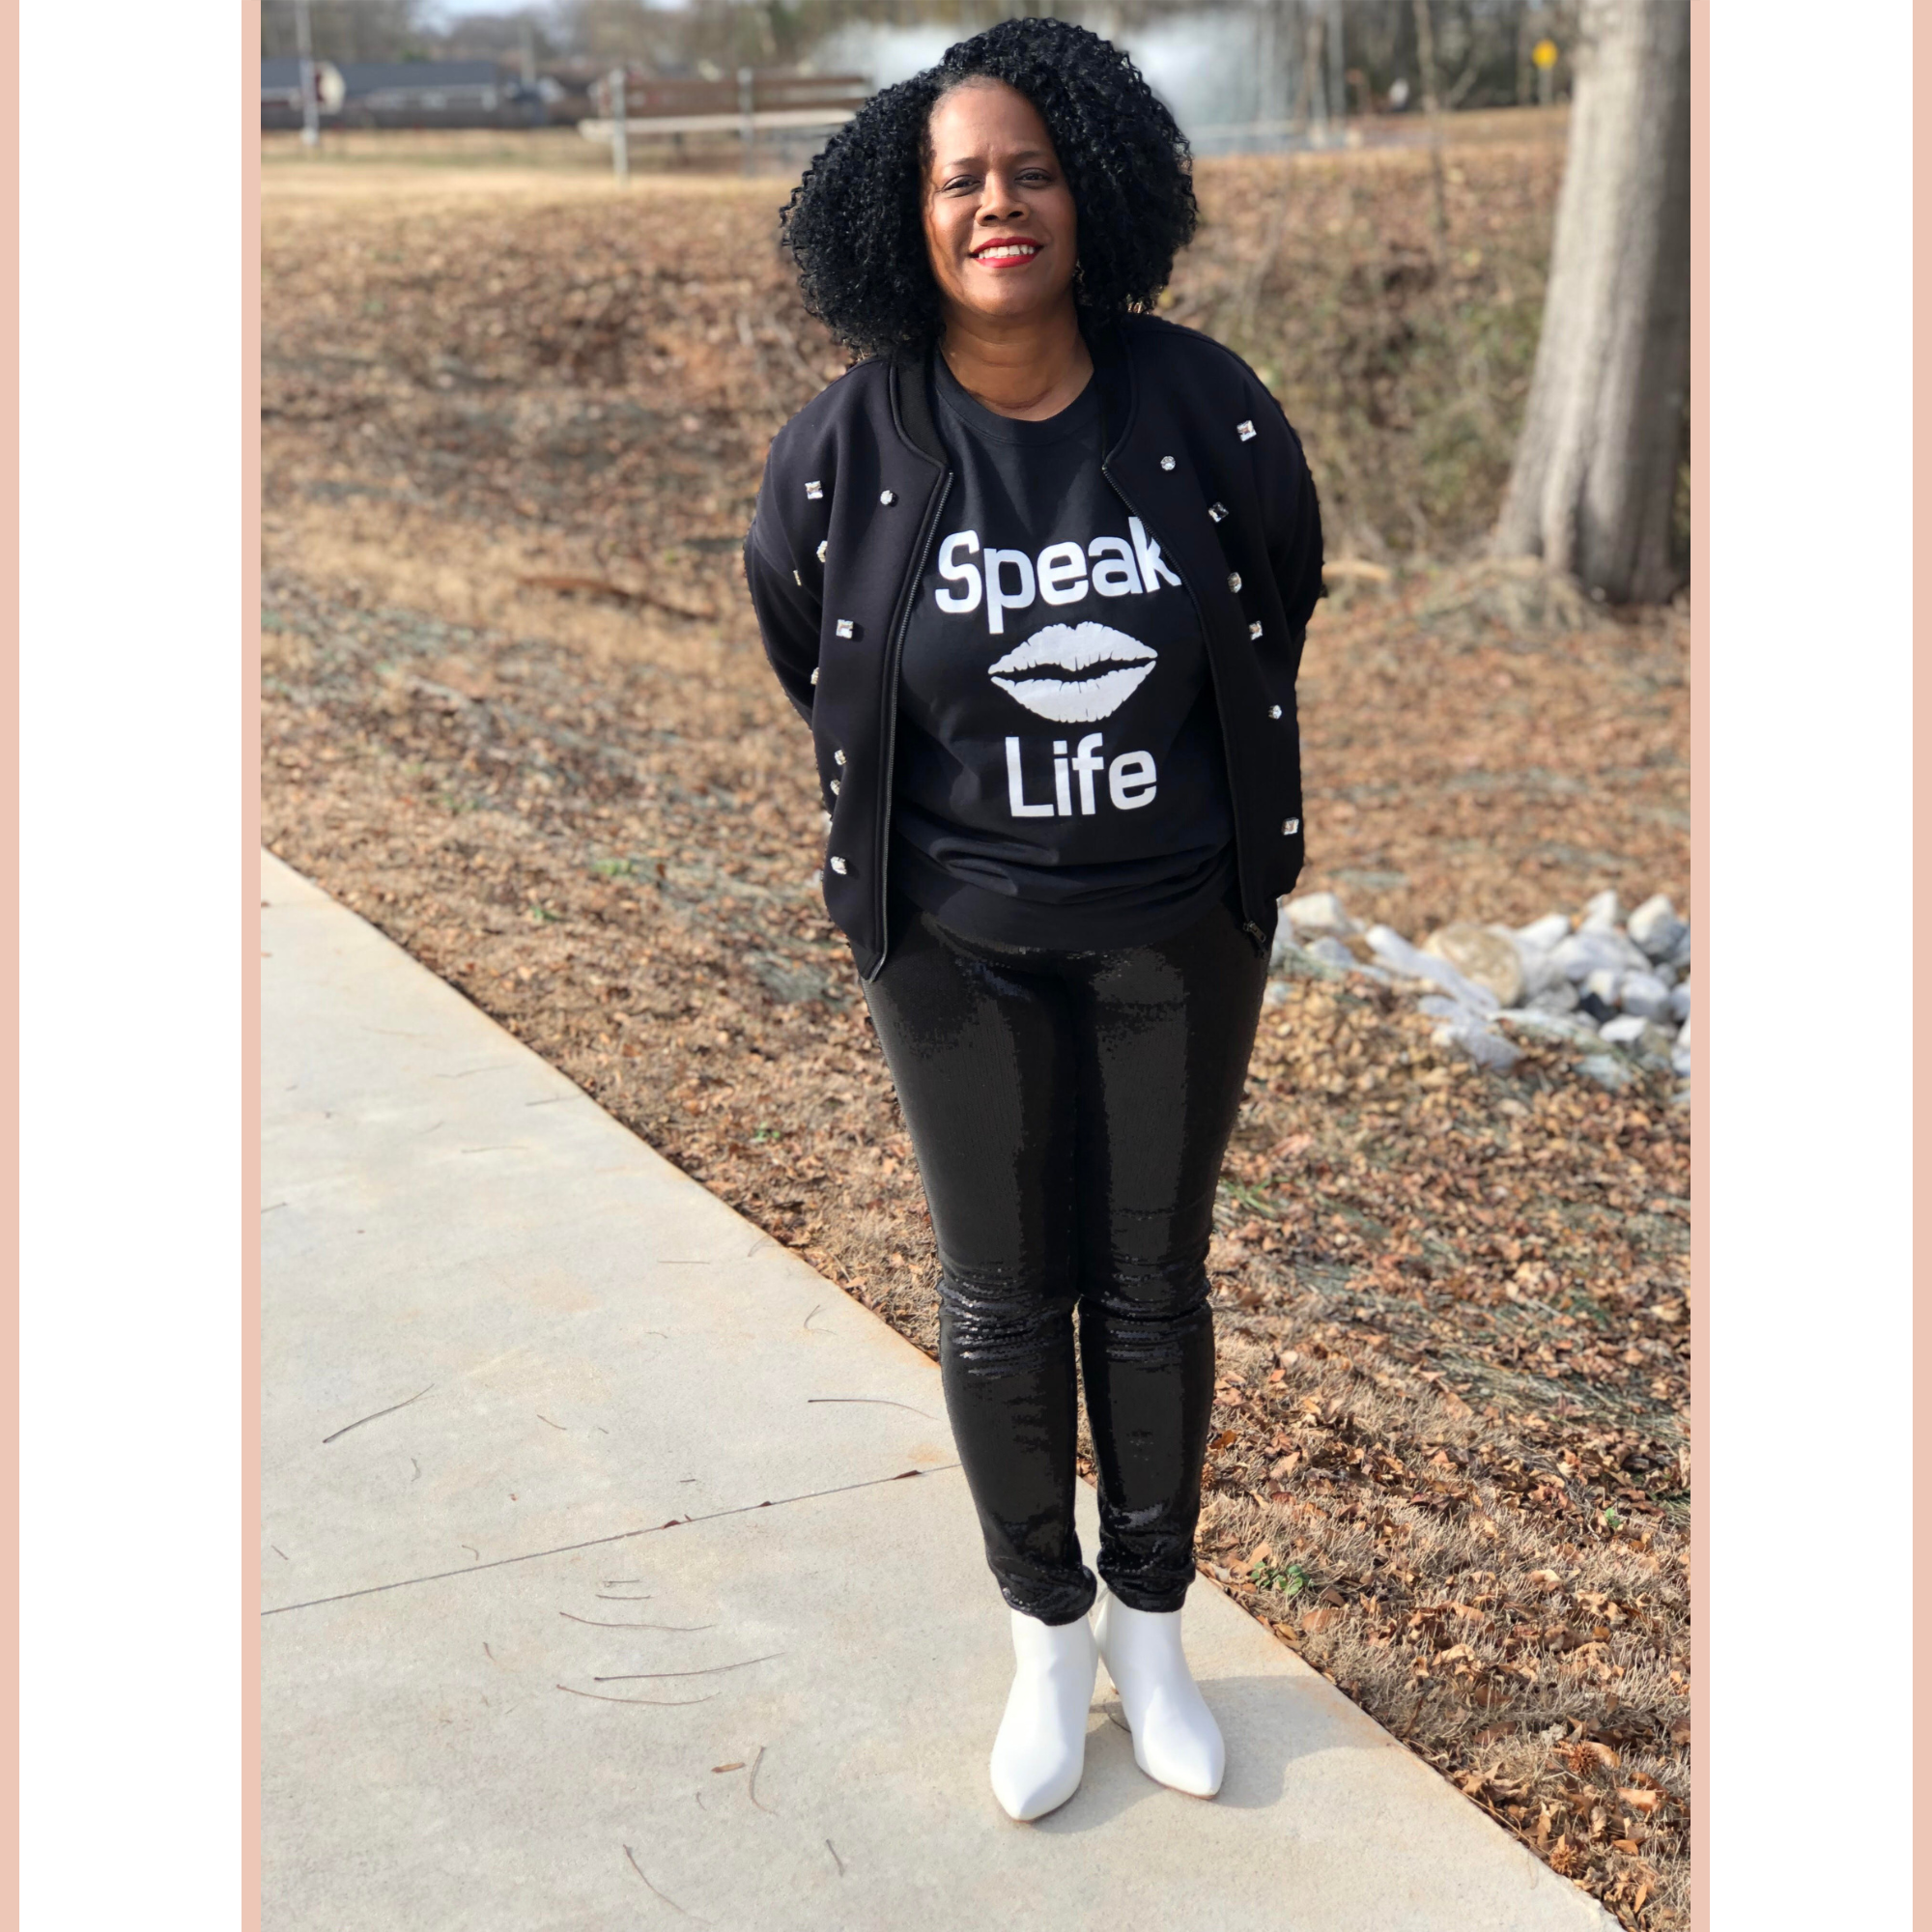 Speak Life Lips T-shirt by GEM Designs, LLC conveys a powerful message. Your words have power. Read Proverbs 18:21 in the Amplified Version.